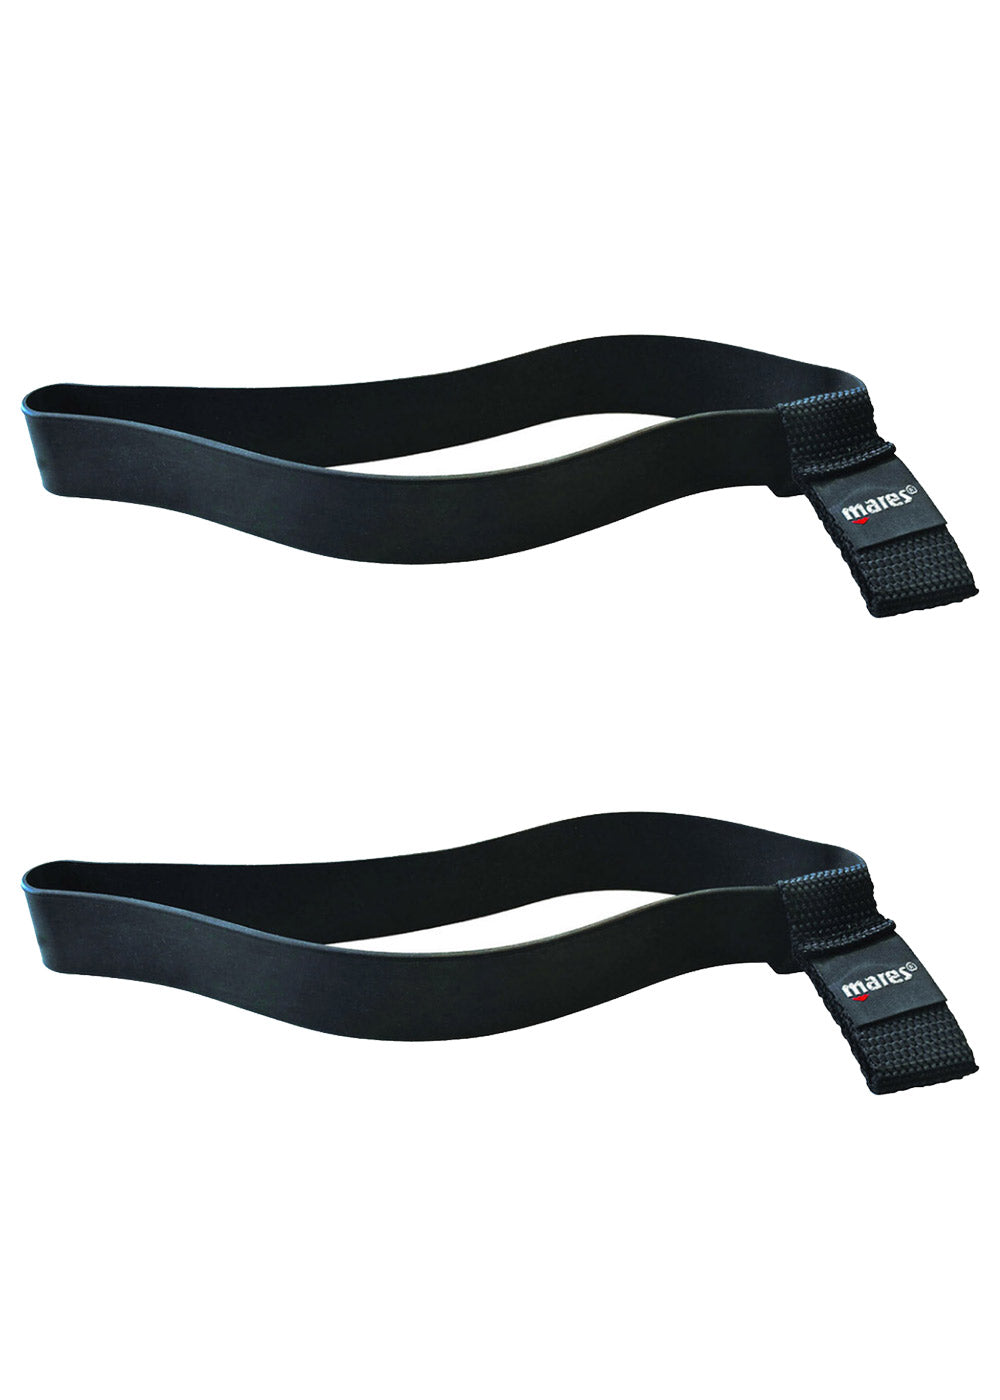 Mares XR Rubber Tank Straps - 7 Inch